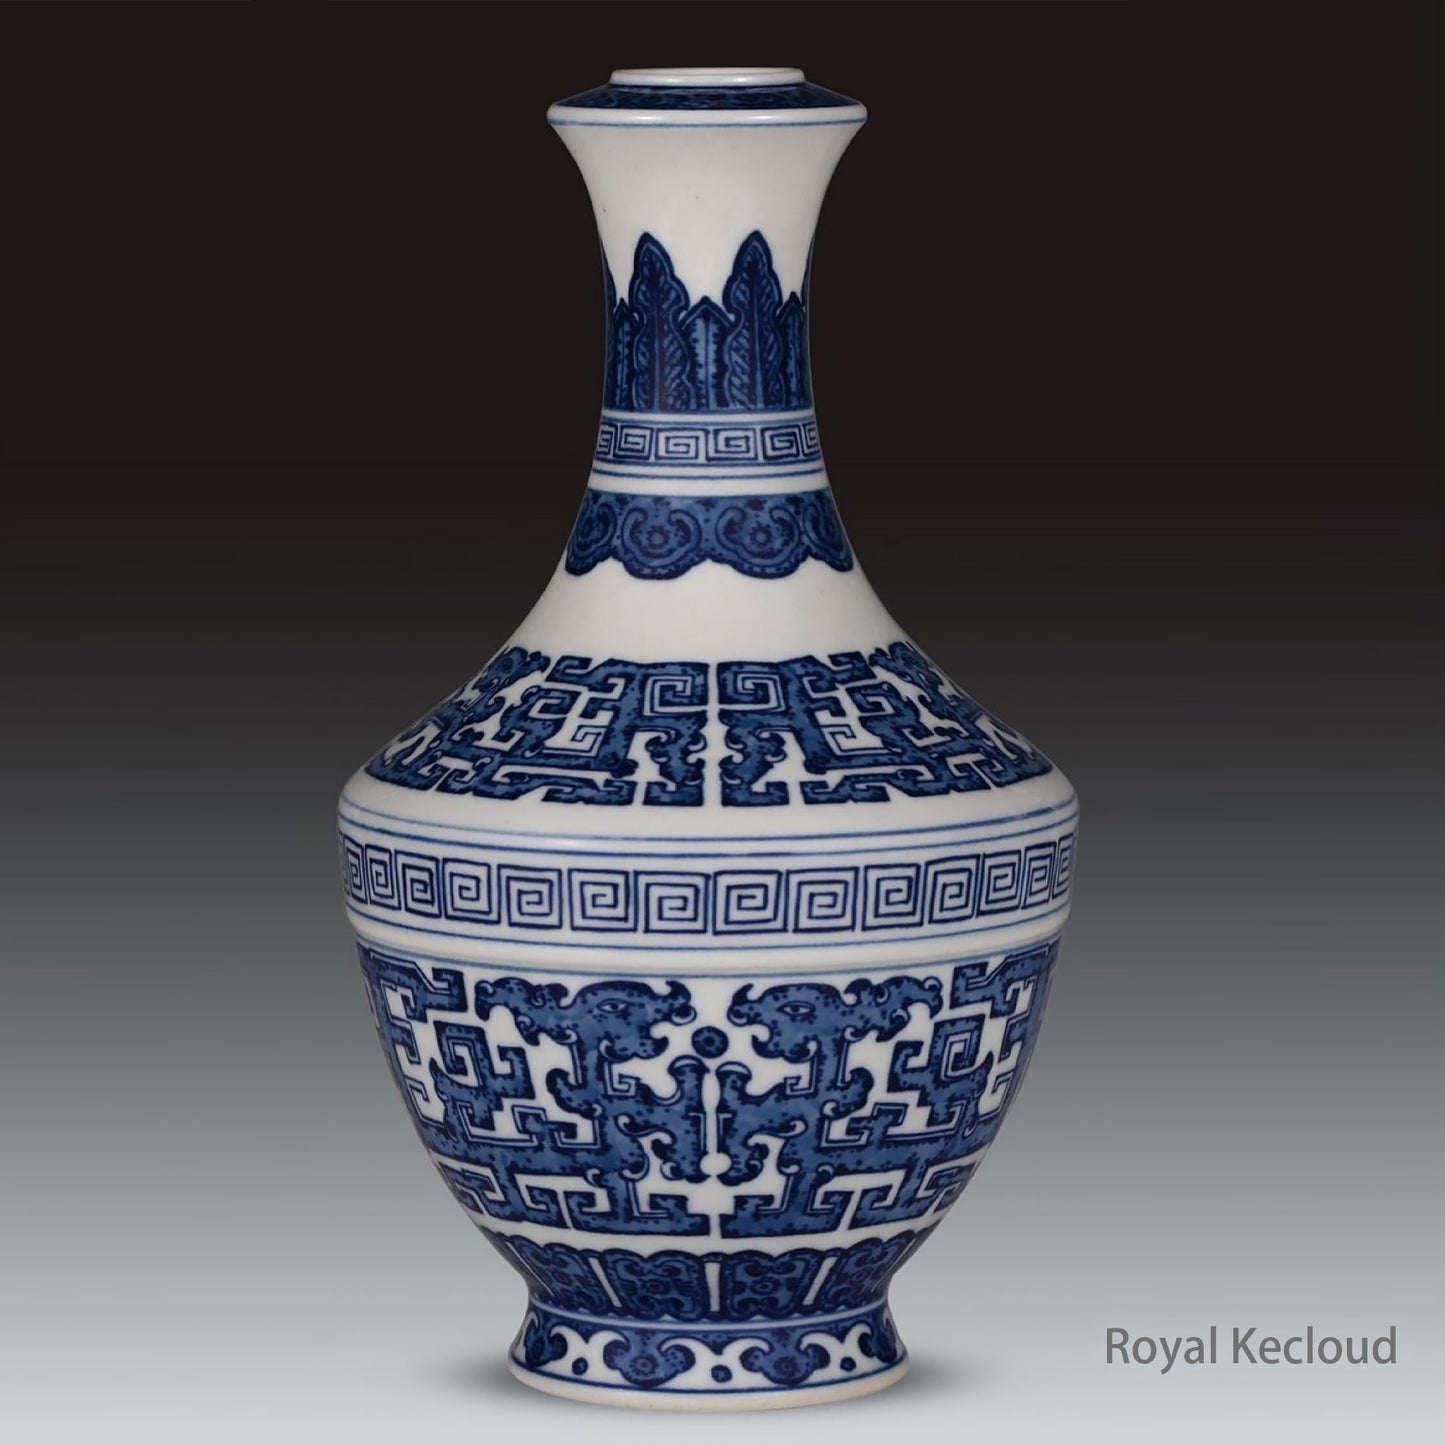 Chinese Ancient Royal Qing Dynasty Blue and White ‘Dragon’ Porcelain Vase